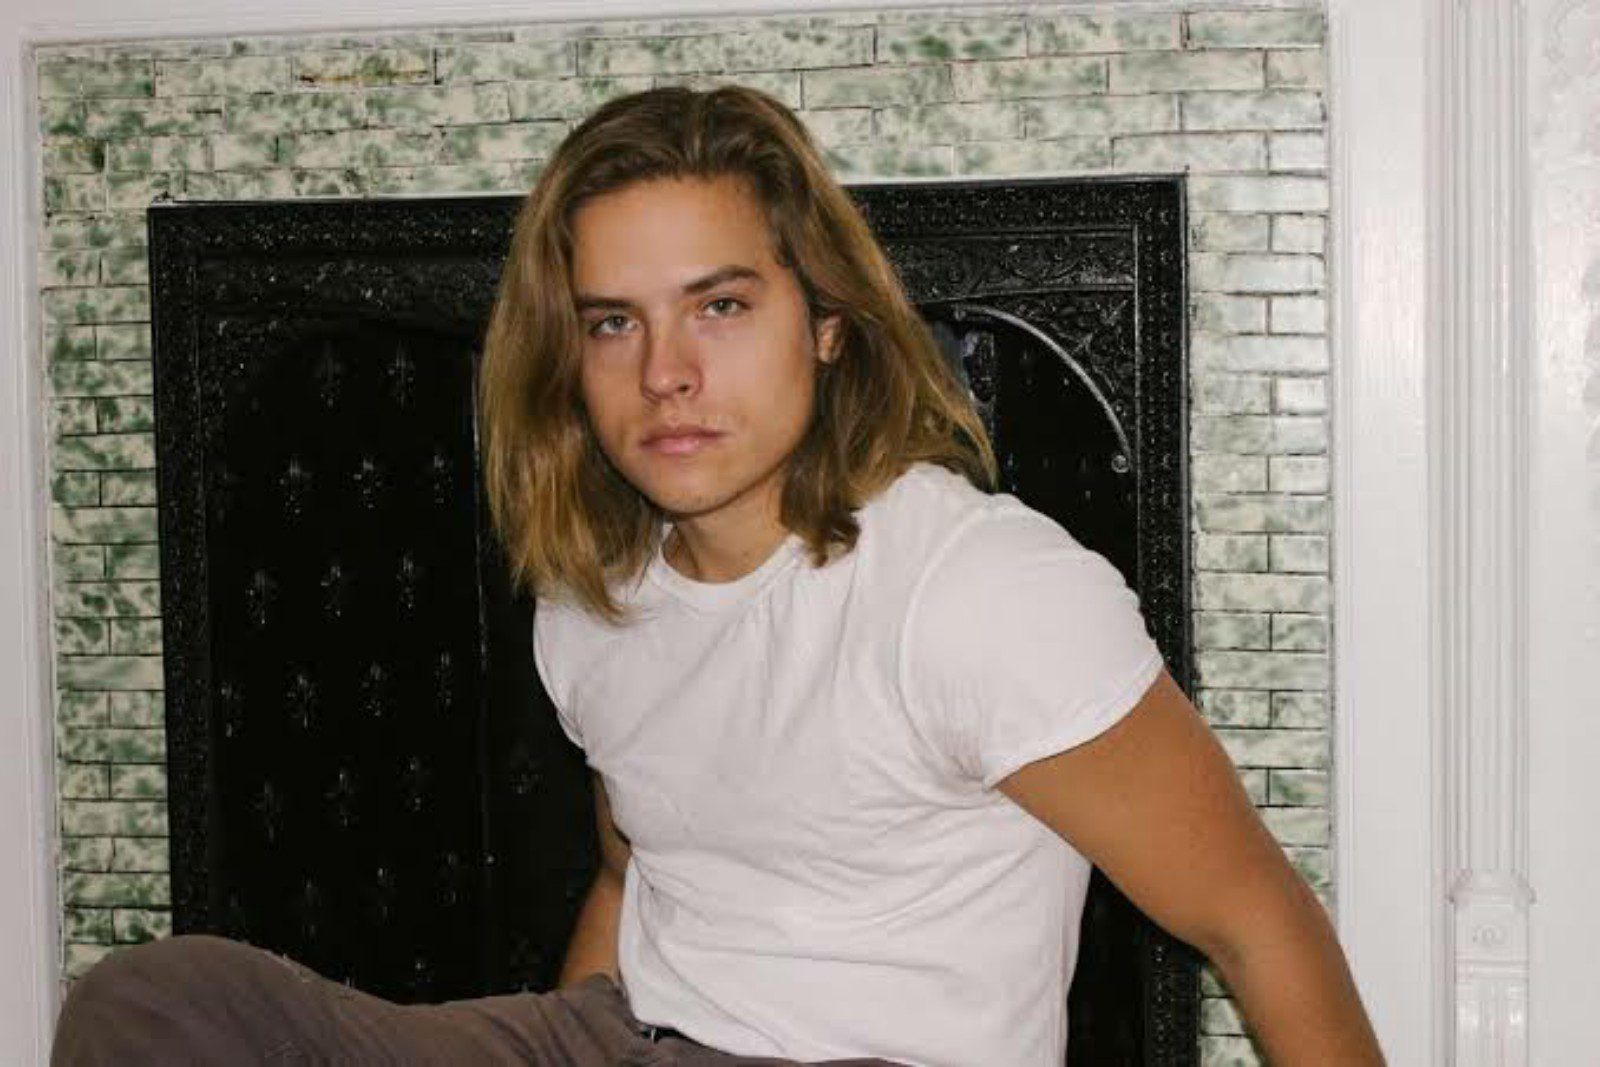 Dylan Sprouse's ex-girlfriend